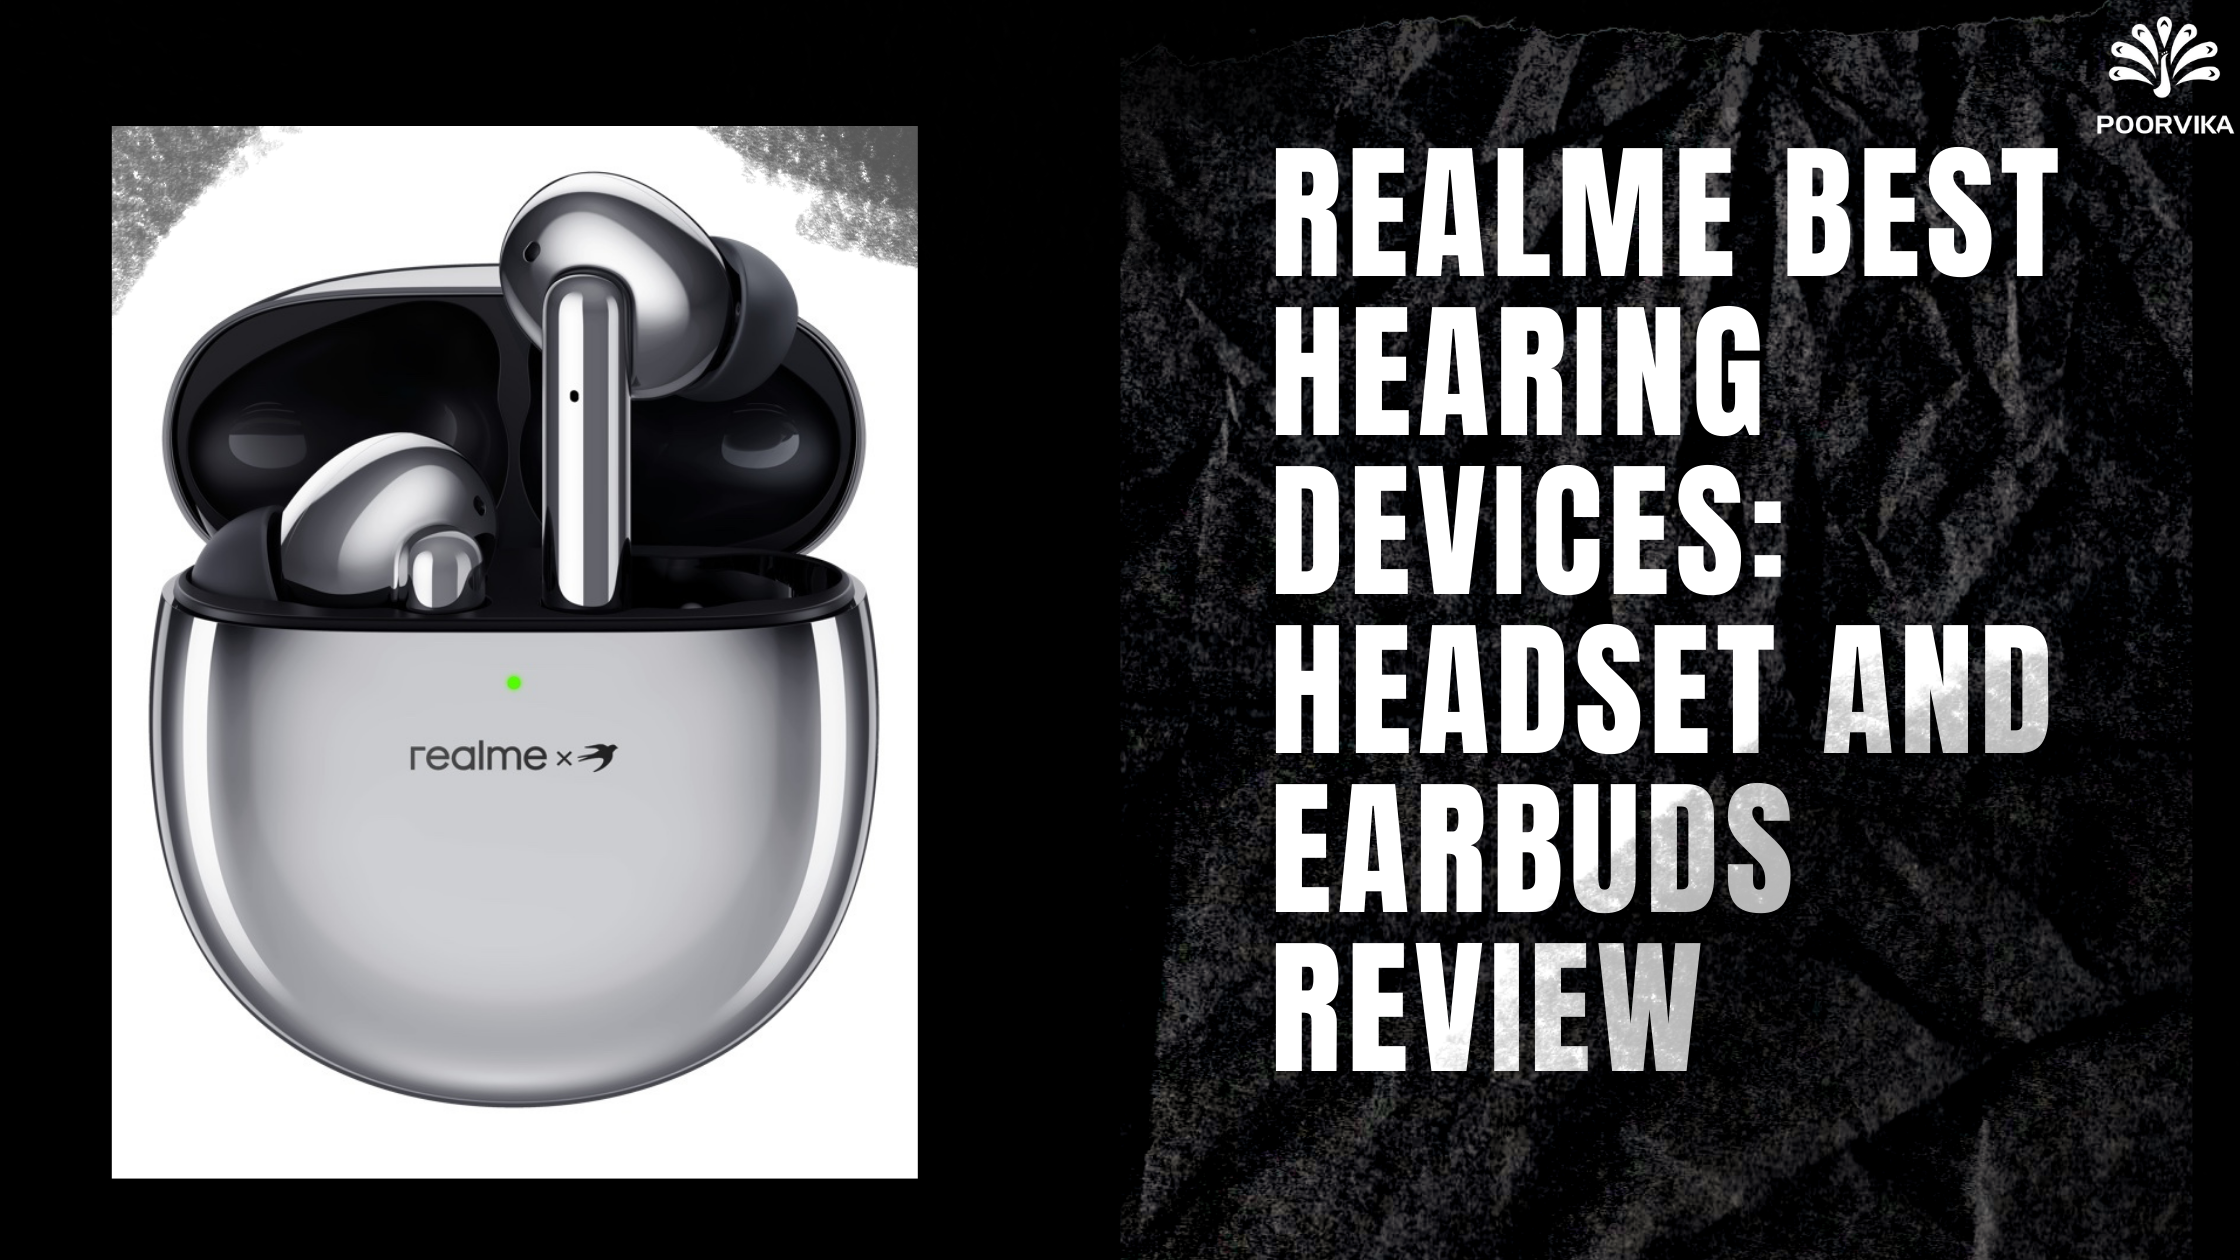 Realme Best Hearing devices: Headset and Earbuds Review